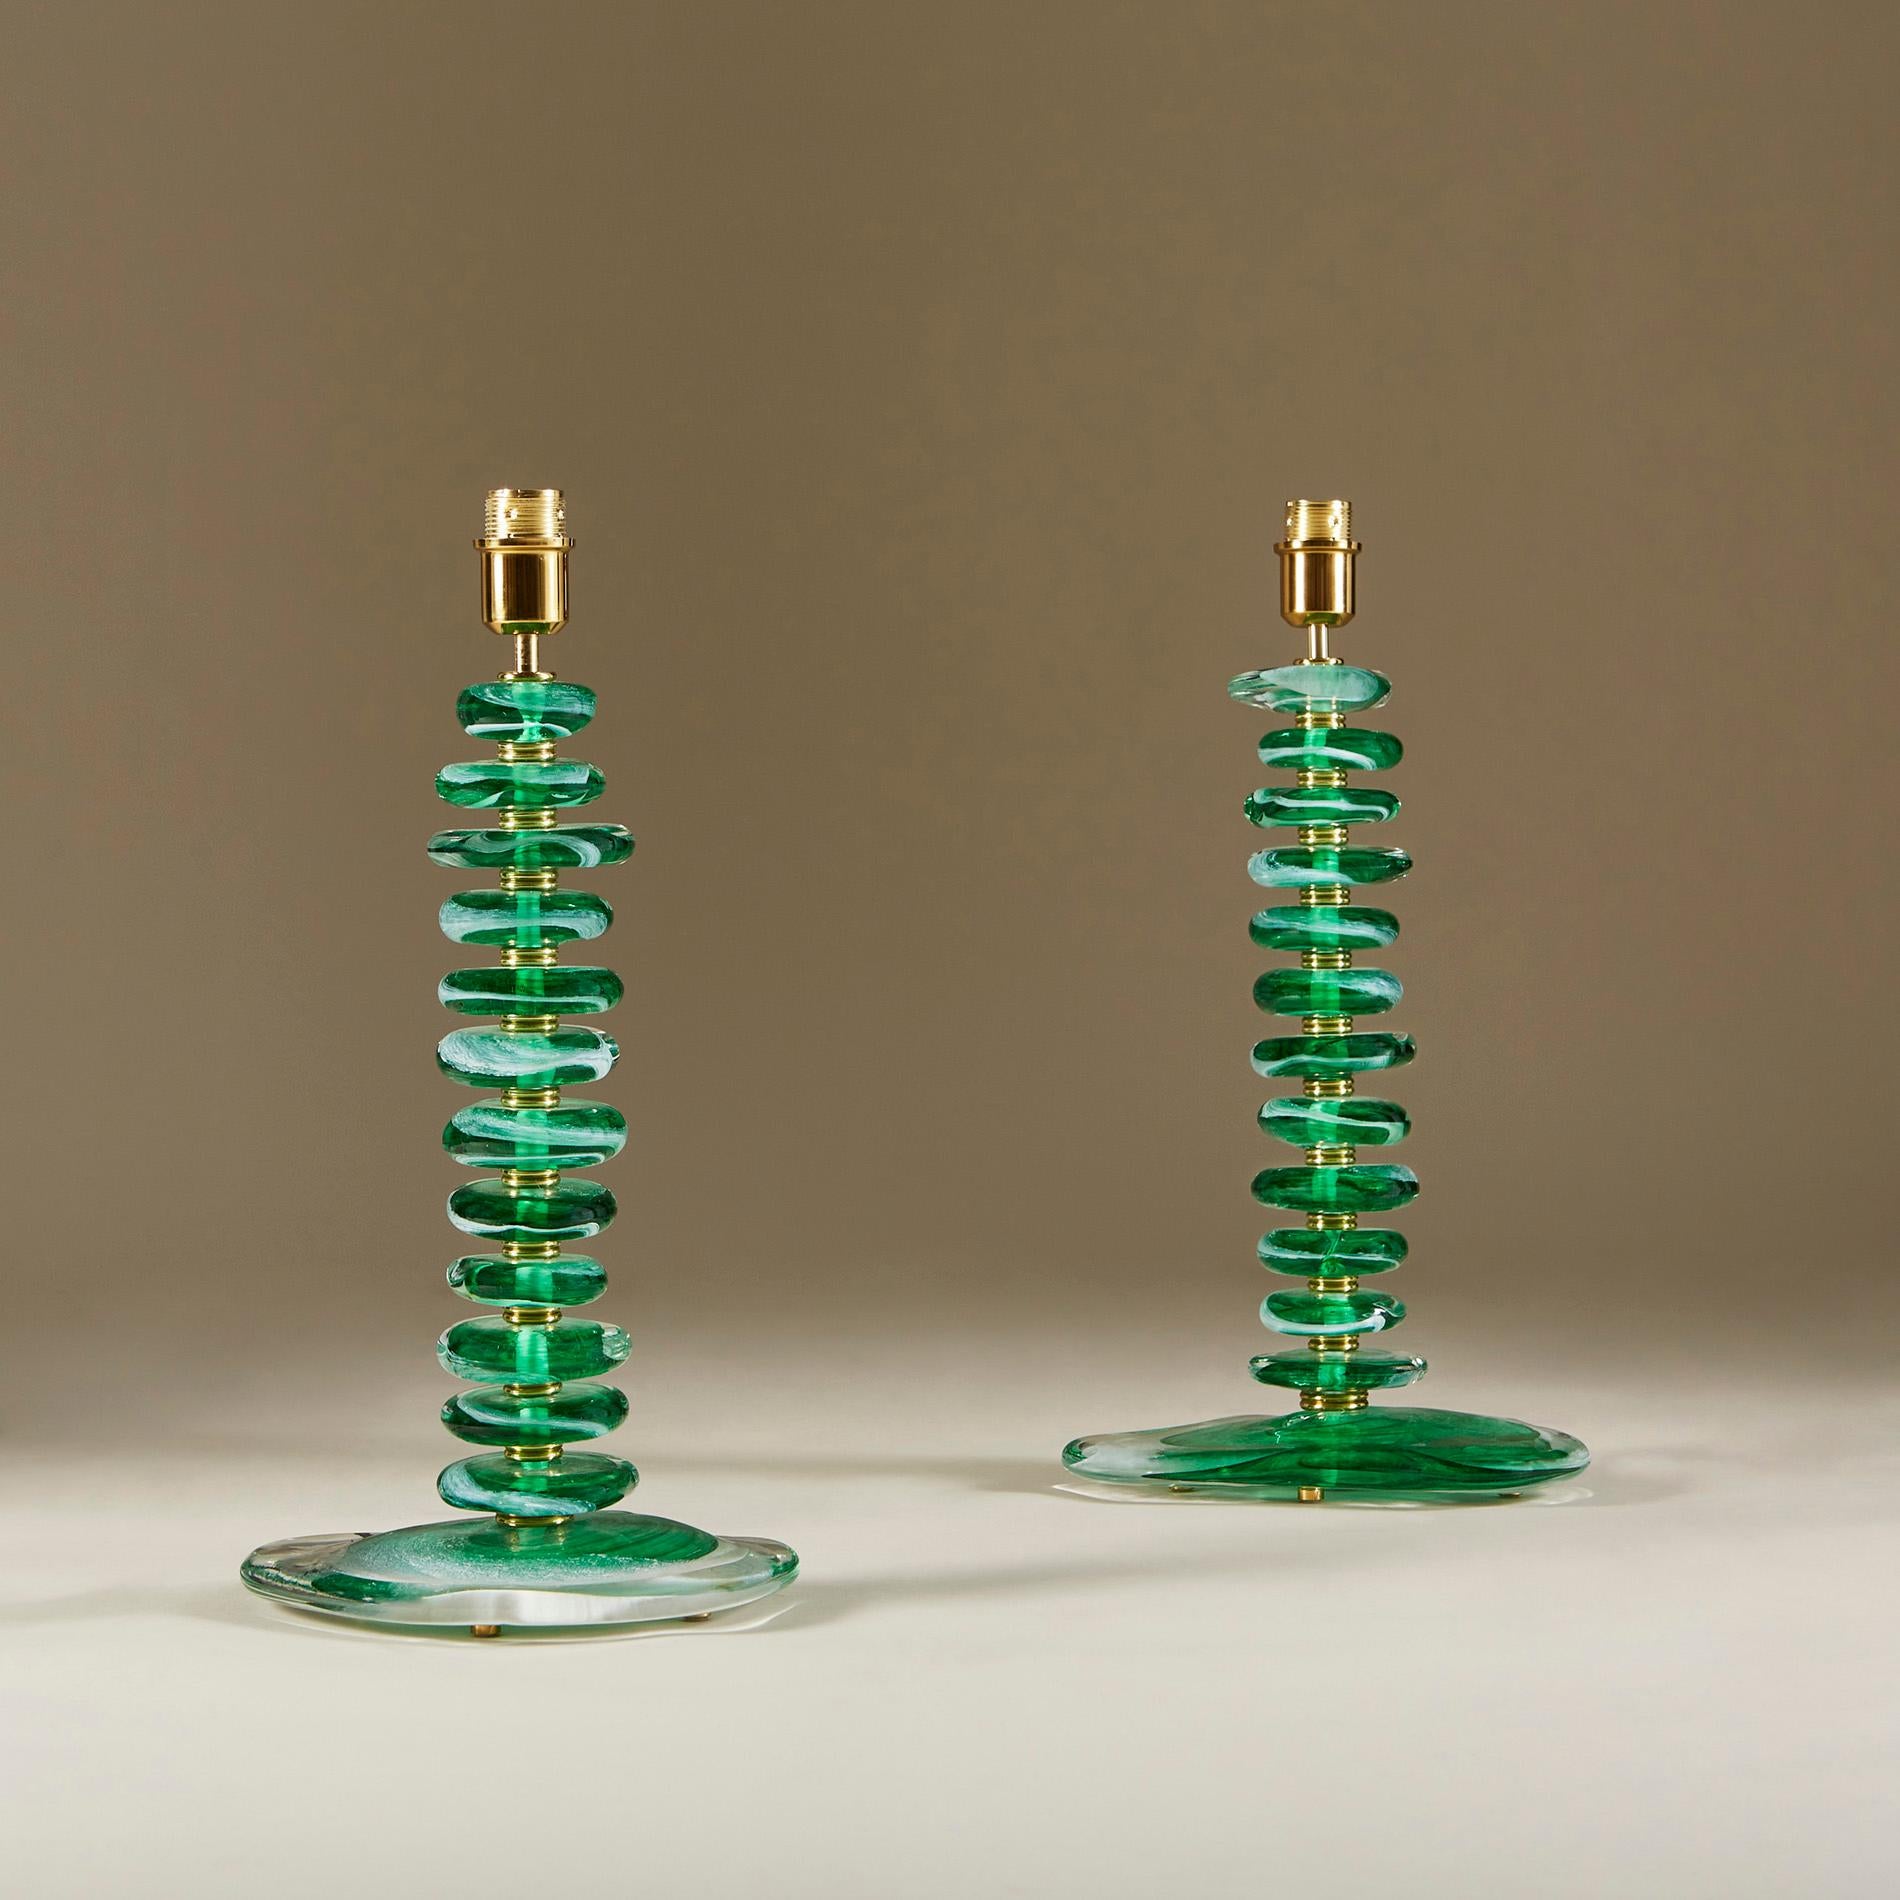 Substantial pair of contemporary table lamps. Each lamp consists of 12 handmade smooth sculptured pebbles in emerald green with clear and white detail. Each pebble is interspersed with double ribbed sections of brass and a brass lamp fitting. Sits